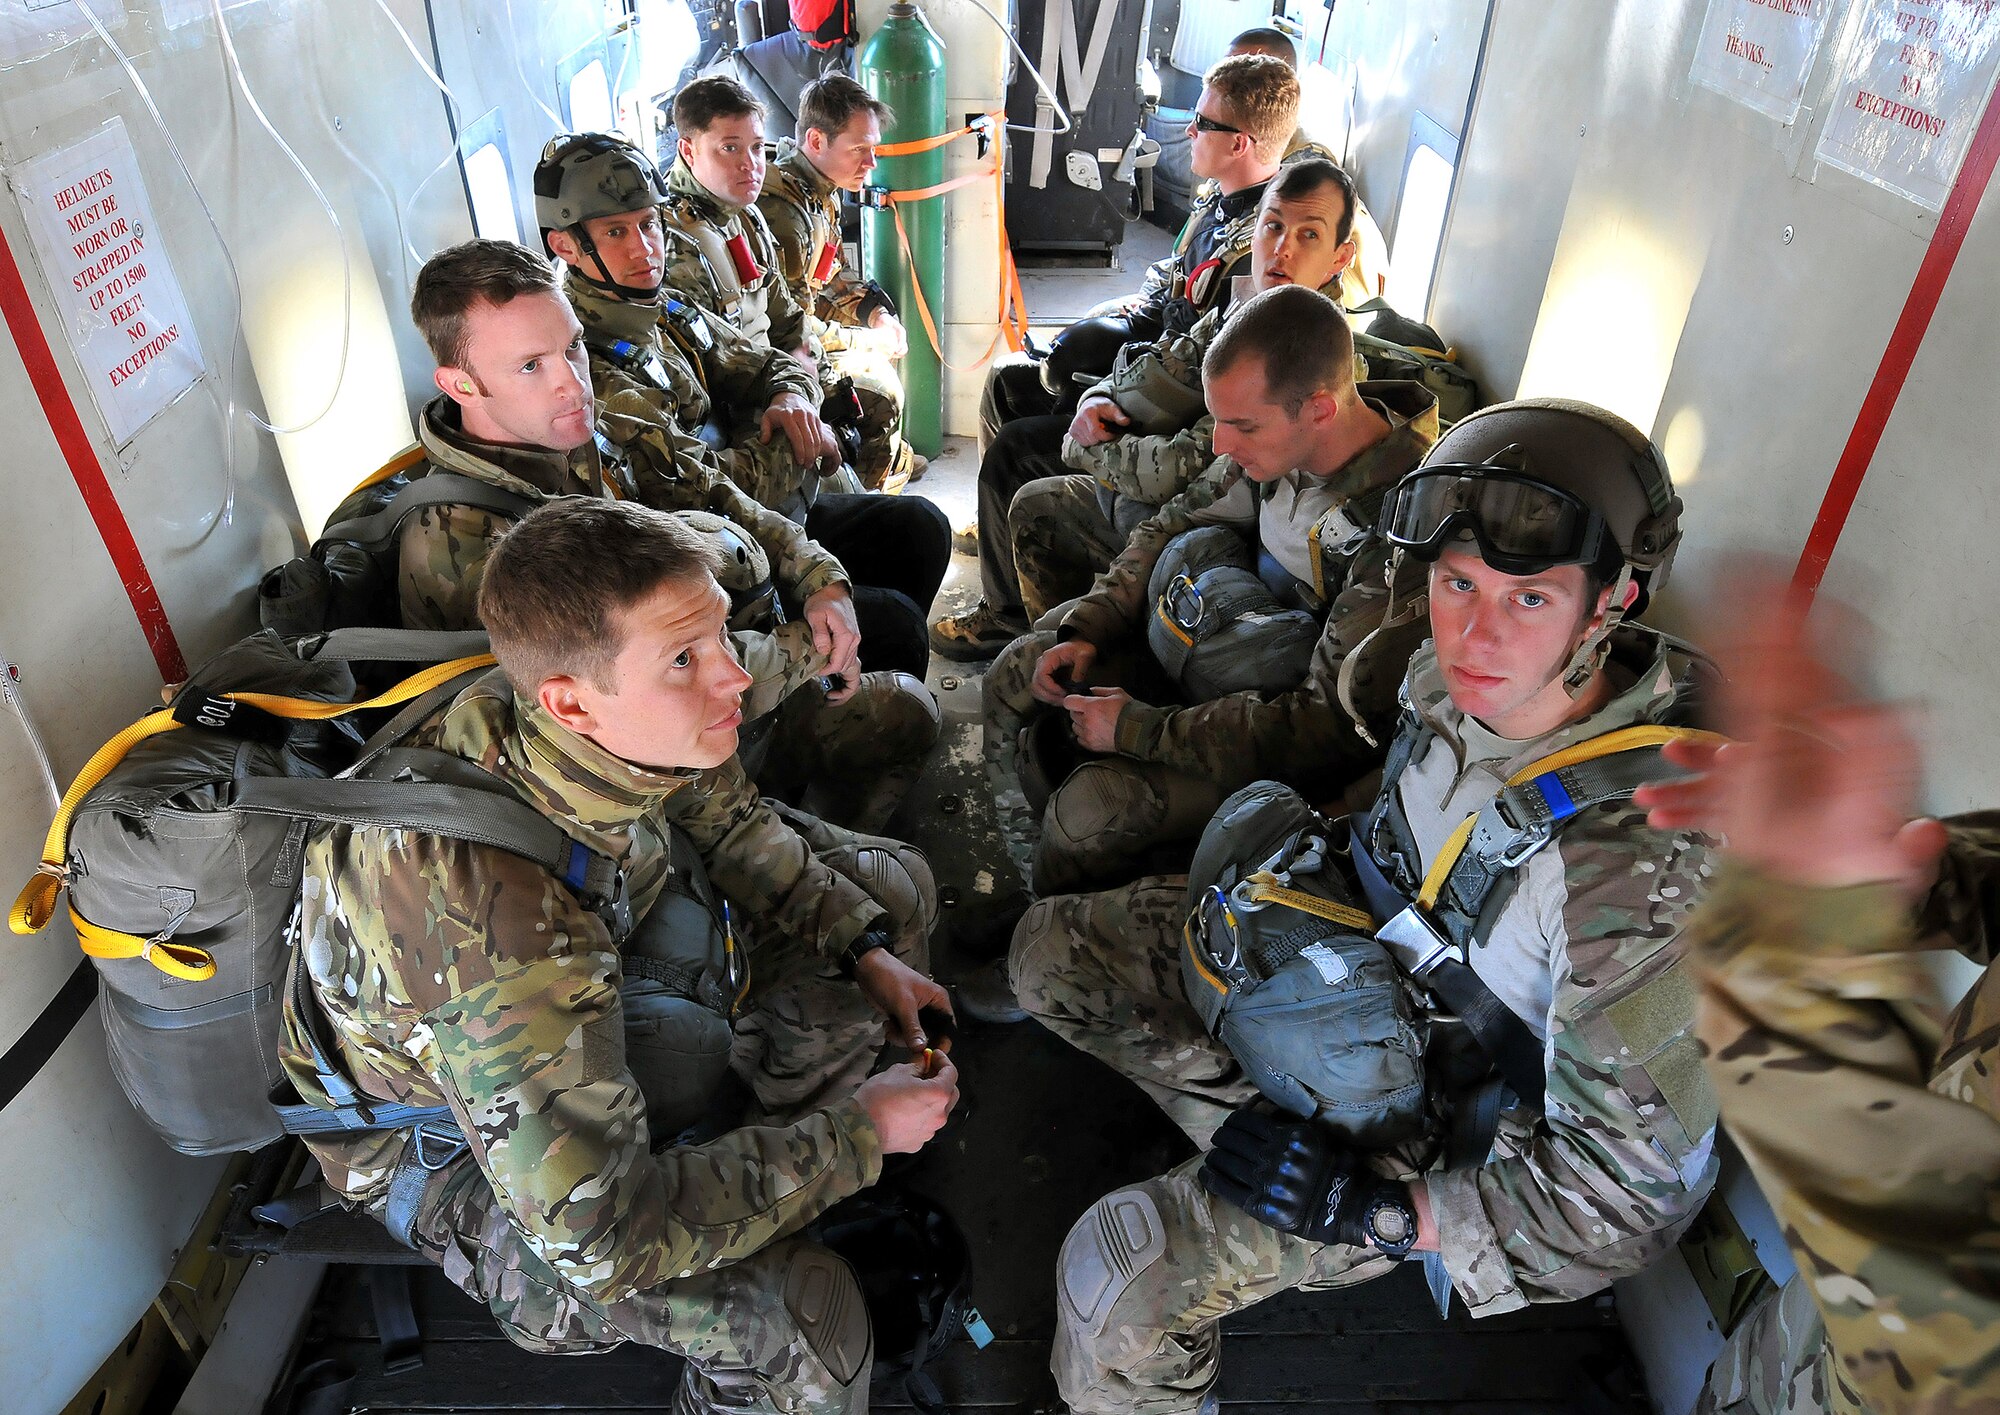 DAVIS-MONTHAN AIR FORCE BASE, Ariz. – Pararecuemen (PJs) assigned to the 306th Rescue Squadron receive last minute instructions as they prepare to parachute out of a skydiving aircraft over the Eloy, Arizona skies during a training mission March 2. PJs are specifically organized, trained and equipped to conduct personnel recovery operations in hostile or denied areas as a primary mission. The 306th RQS is a subordinate unit of the 943rd Rescue Group, which trains and equips Citizen Airmen to perform personnel recovery operations worldwide. (U.S. Air Force photo/Tech. Sgt. Frank Oliver)